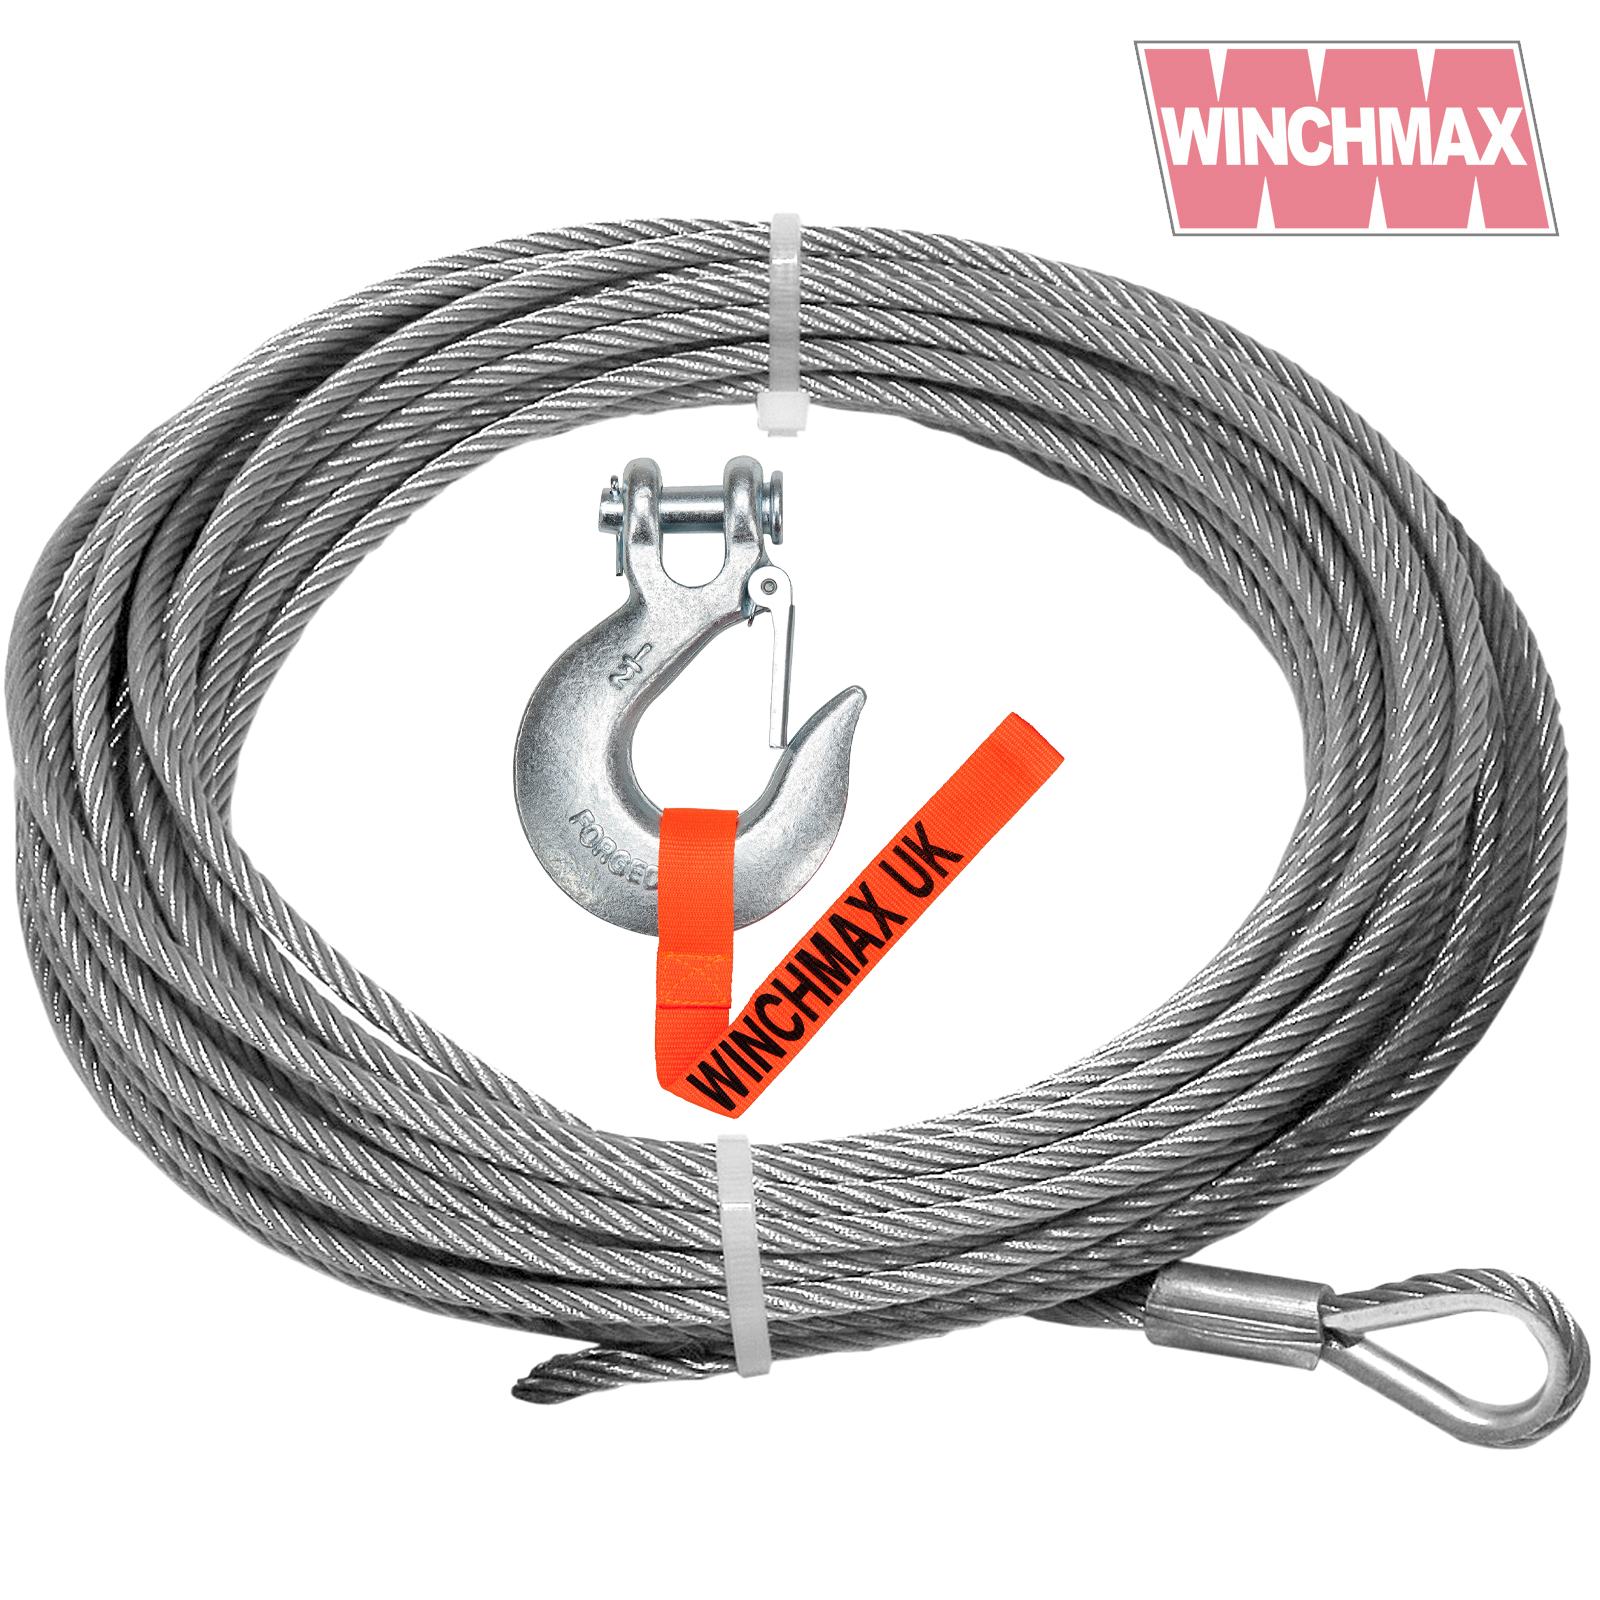 Steel Rope 26m x 9.5mm, Hole Fix. 3/8 inch Clevis Hook. For